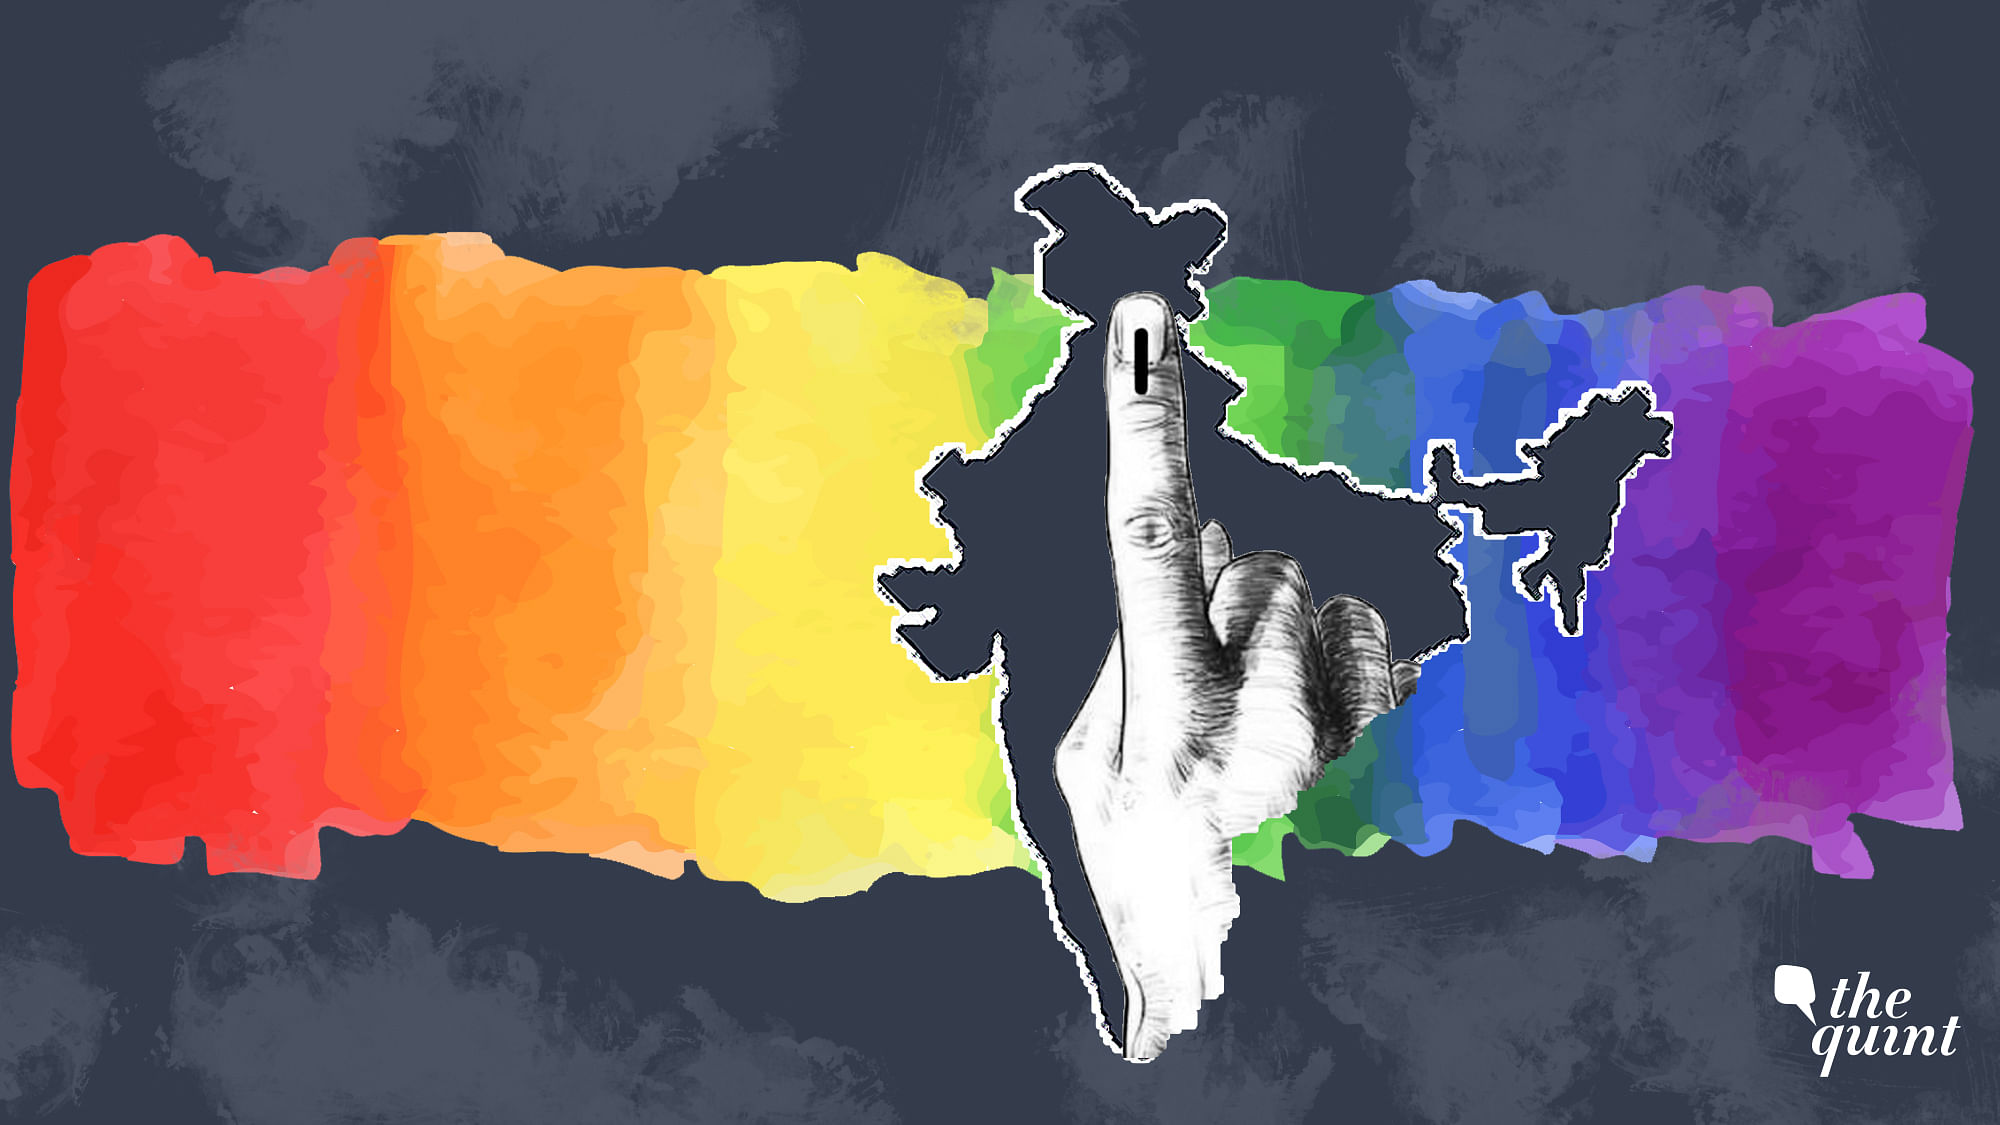 Both the BJP and the Congress have included LGBTQ rights in their manifestos. But is this enough?